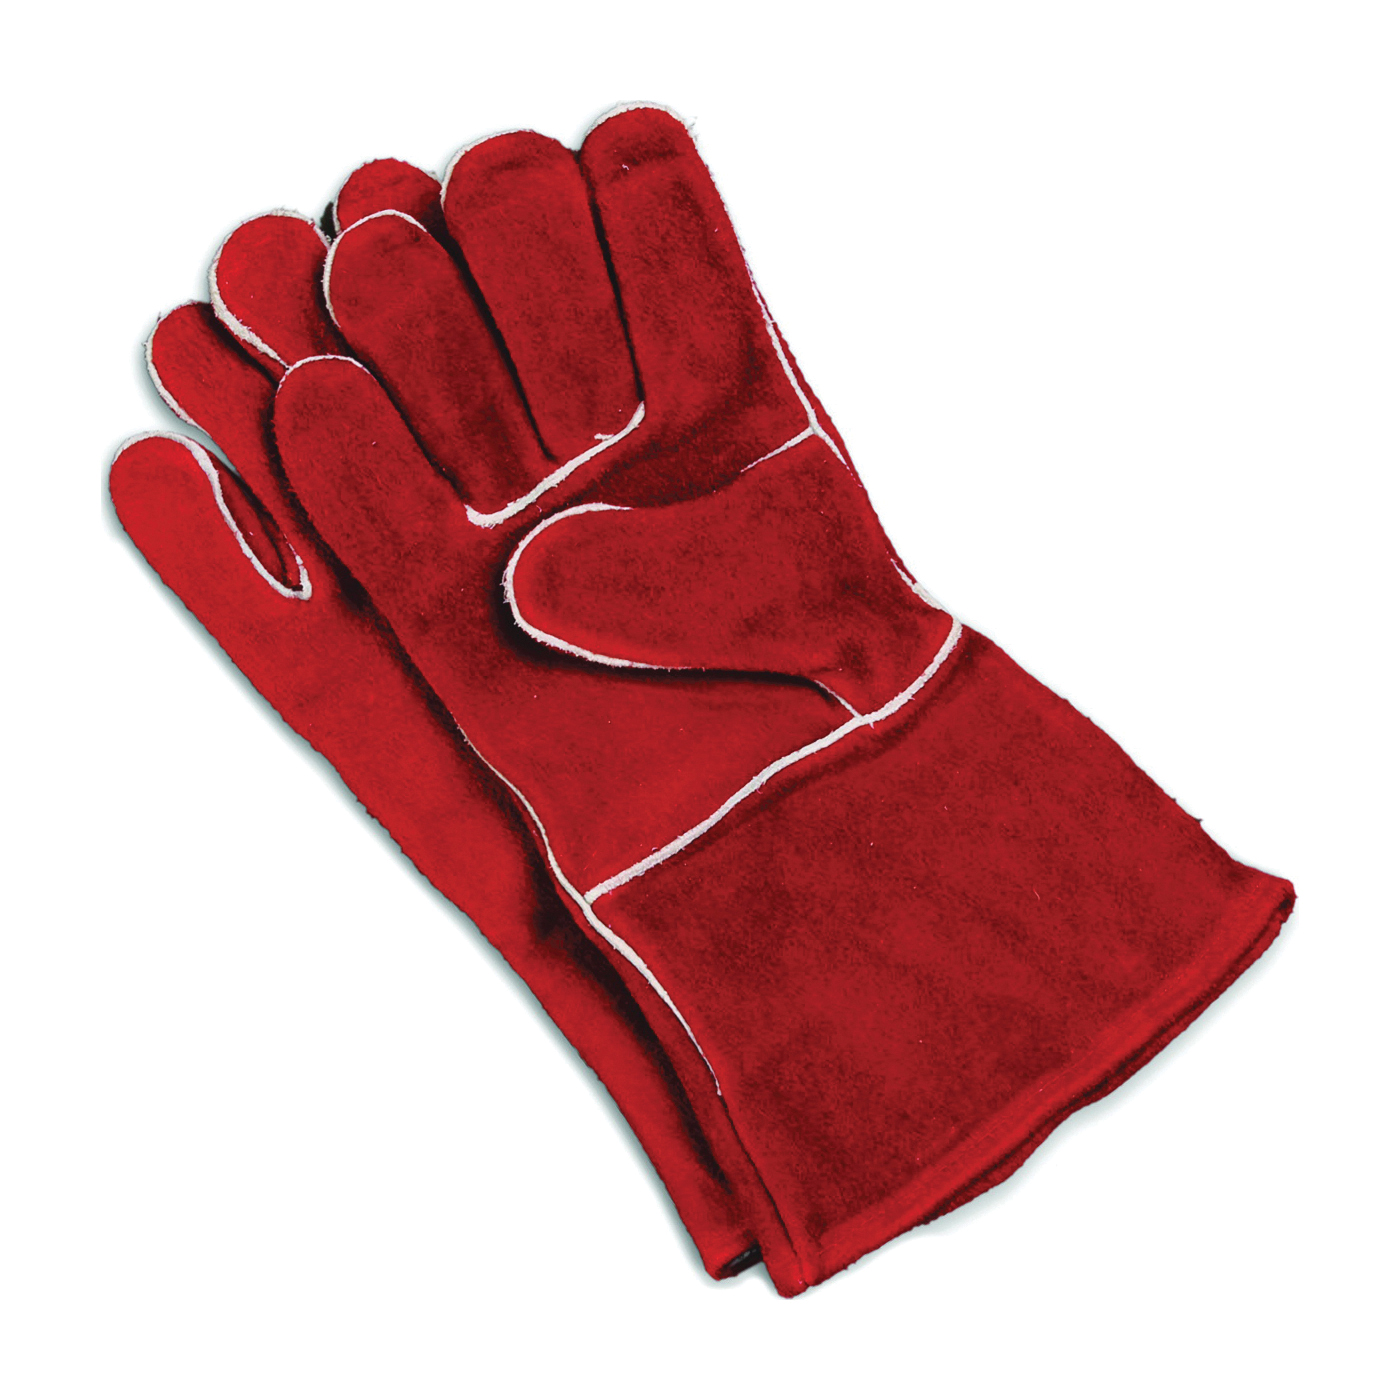 KK0159 Fireplace Gloves, Cowhide Leather Lining, Cowhide Leather, Red